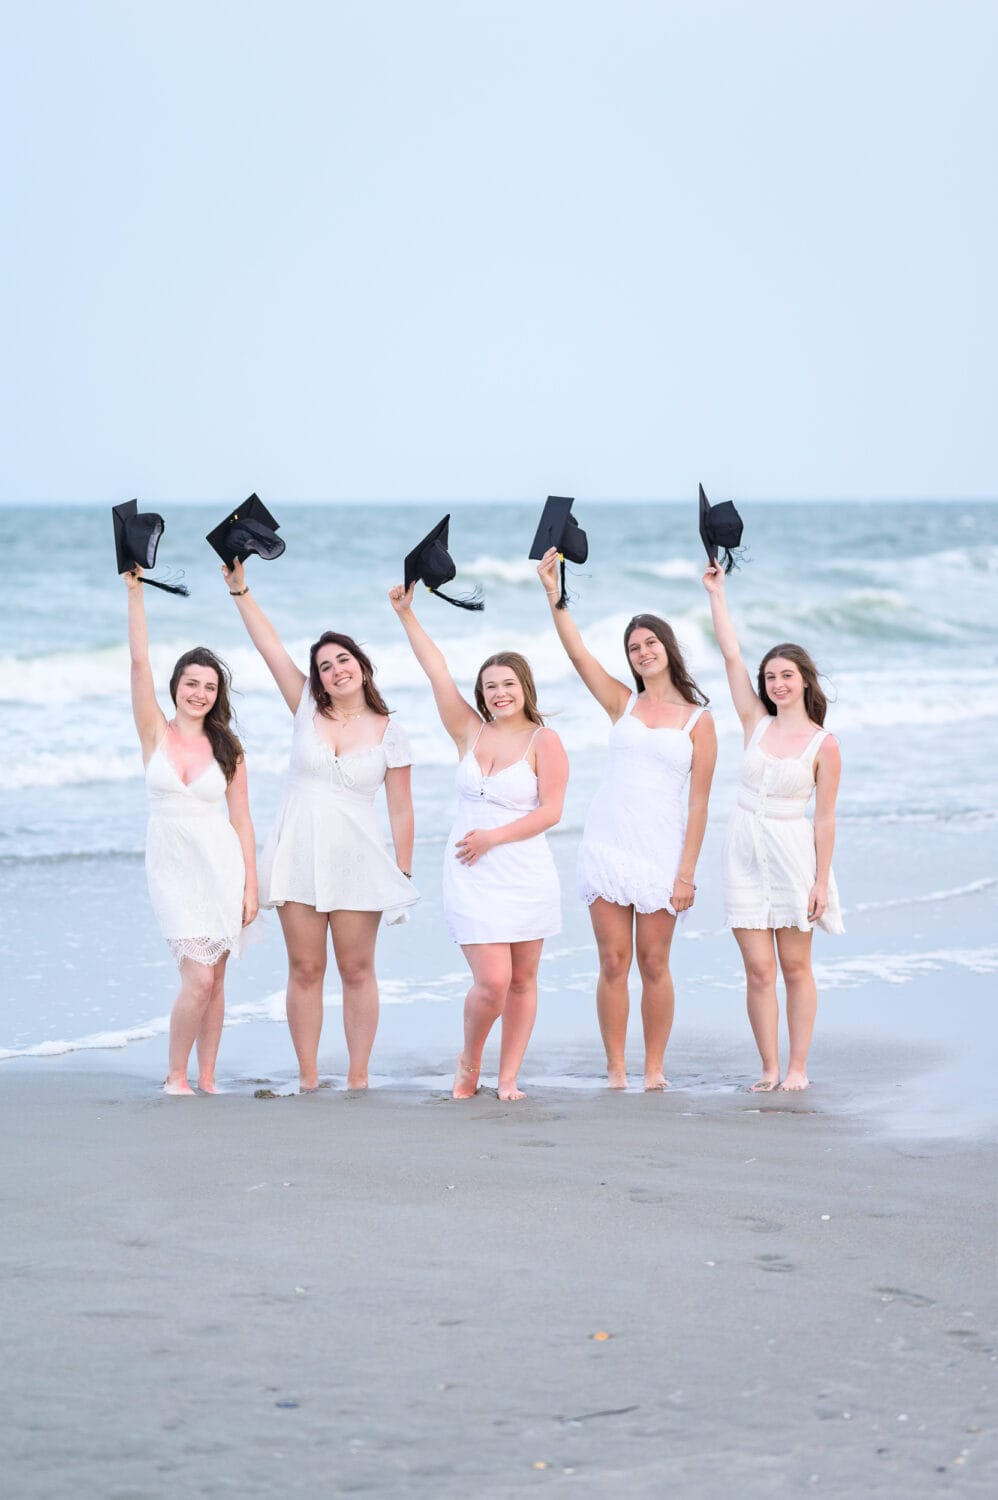 Five senior girls holding their caps in the air - Myrtle Beach State Park